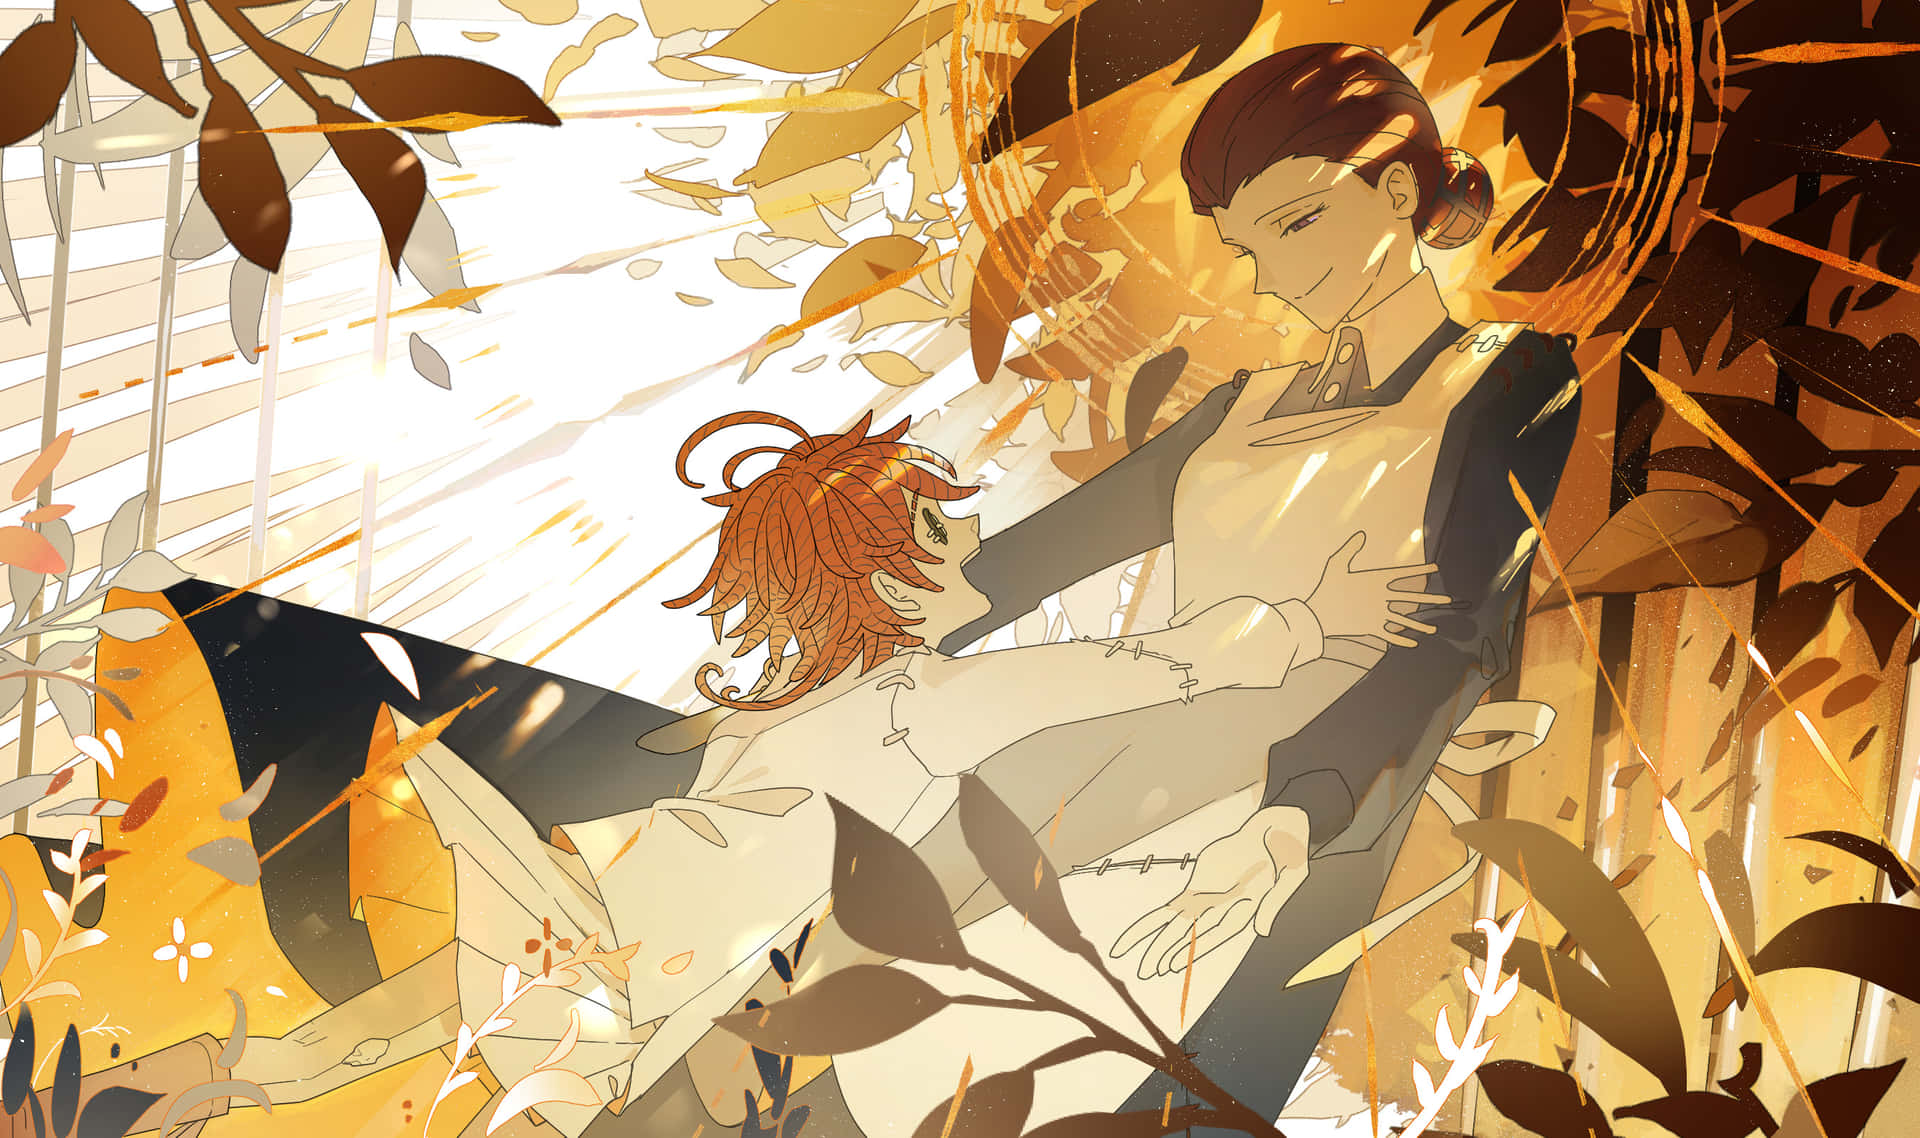 100+] Promised Neverland Wallpapers